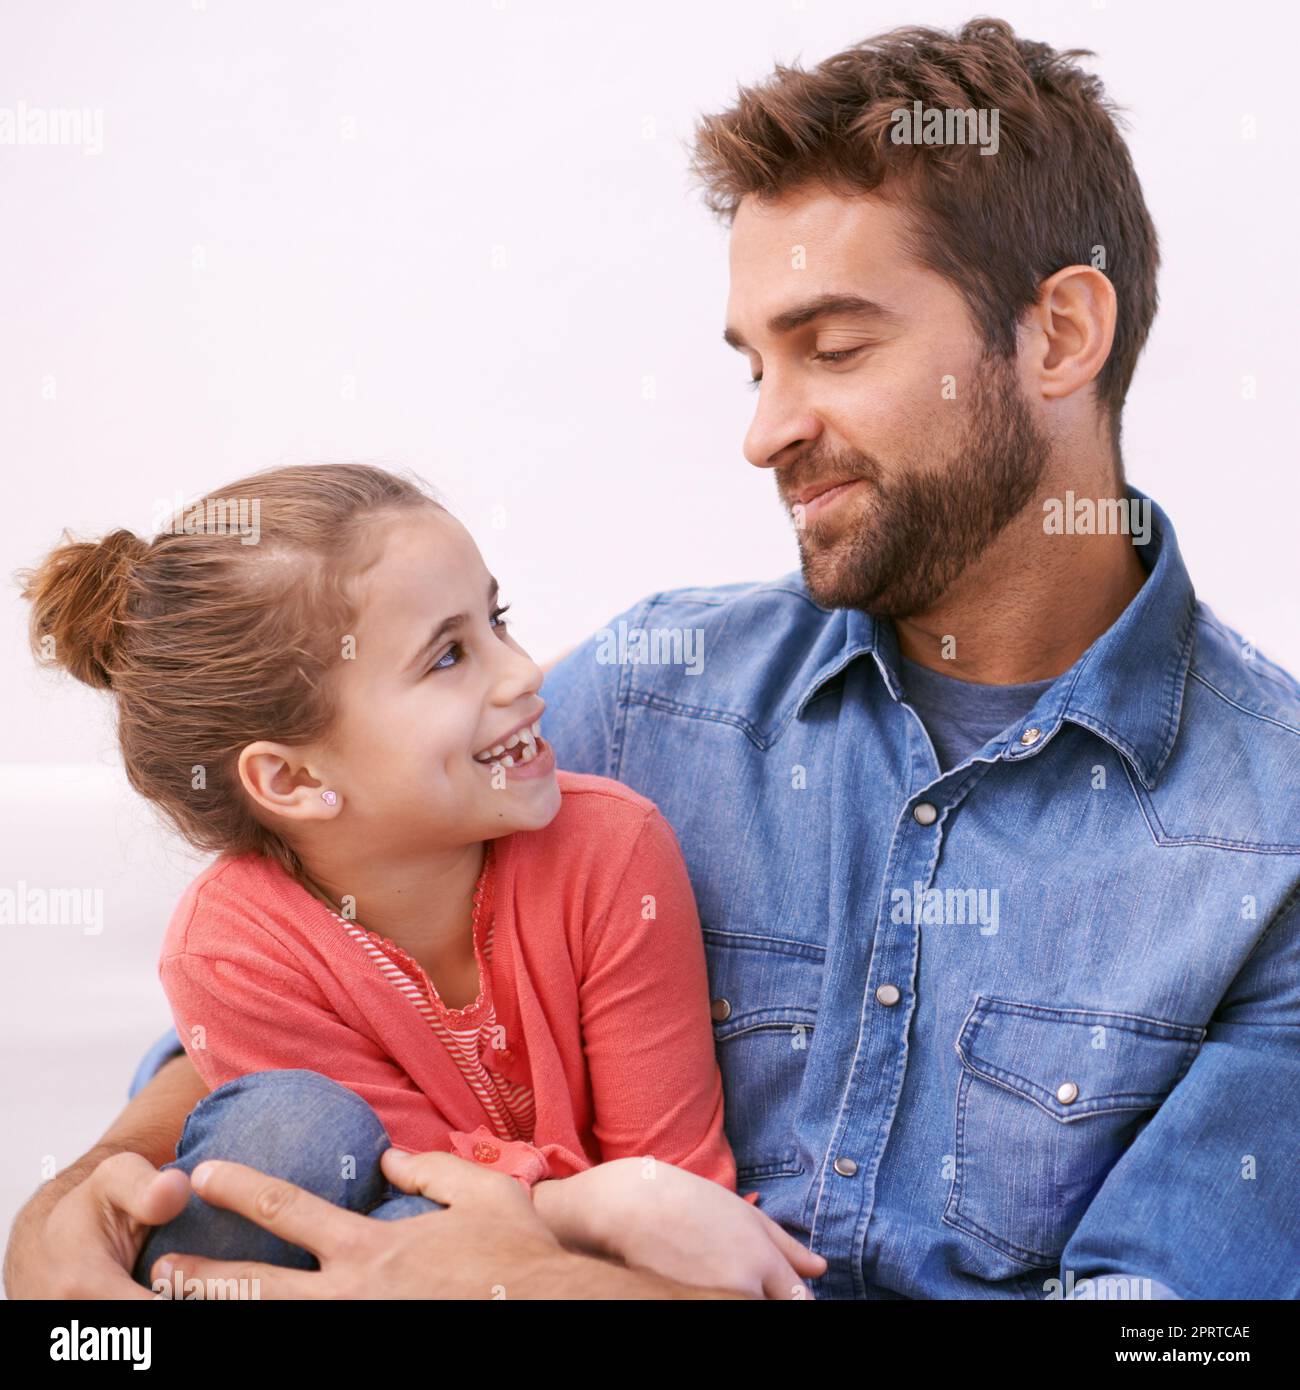 She knows just how to get her way. a handsome man spending time with his daughter. Stock Photo